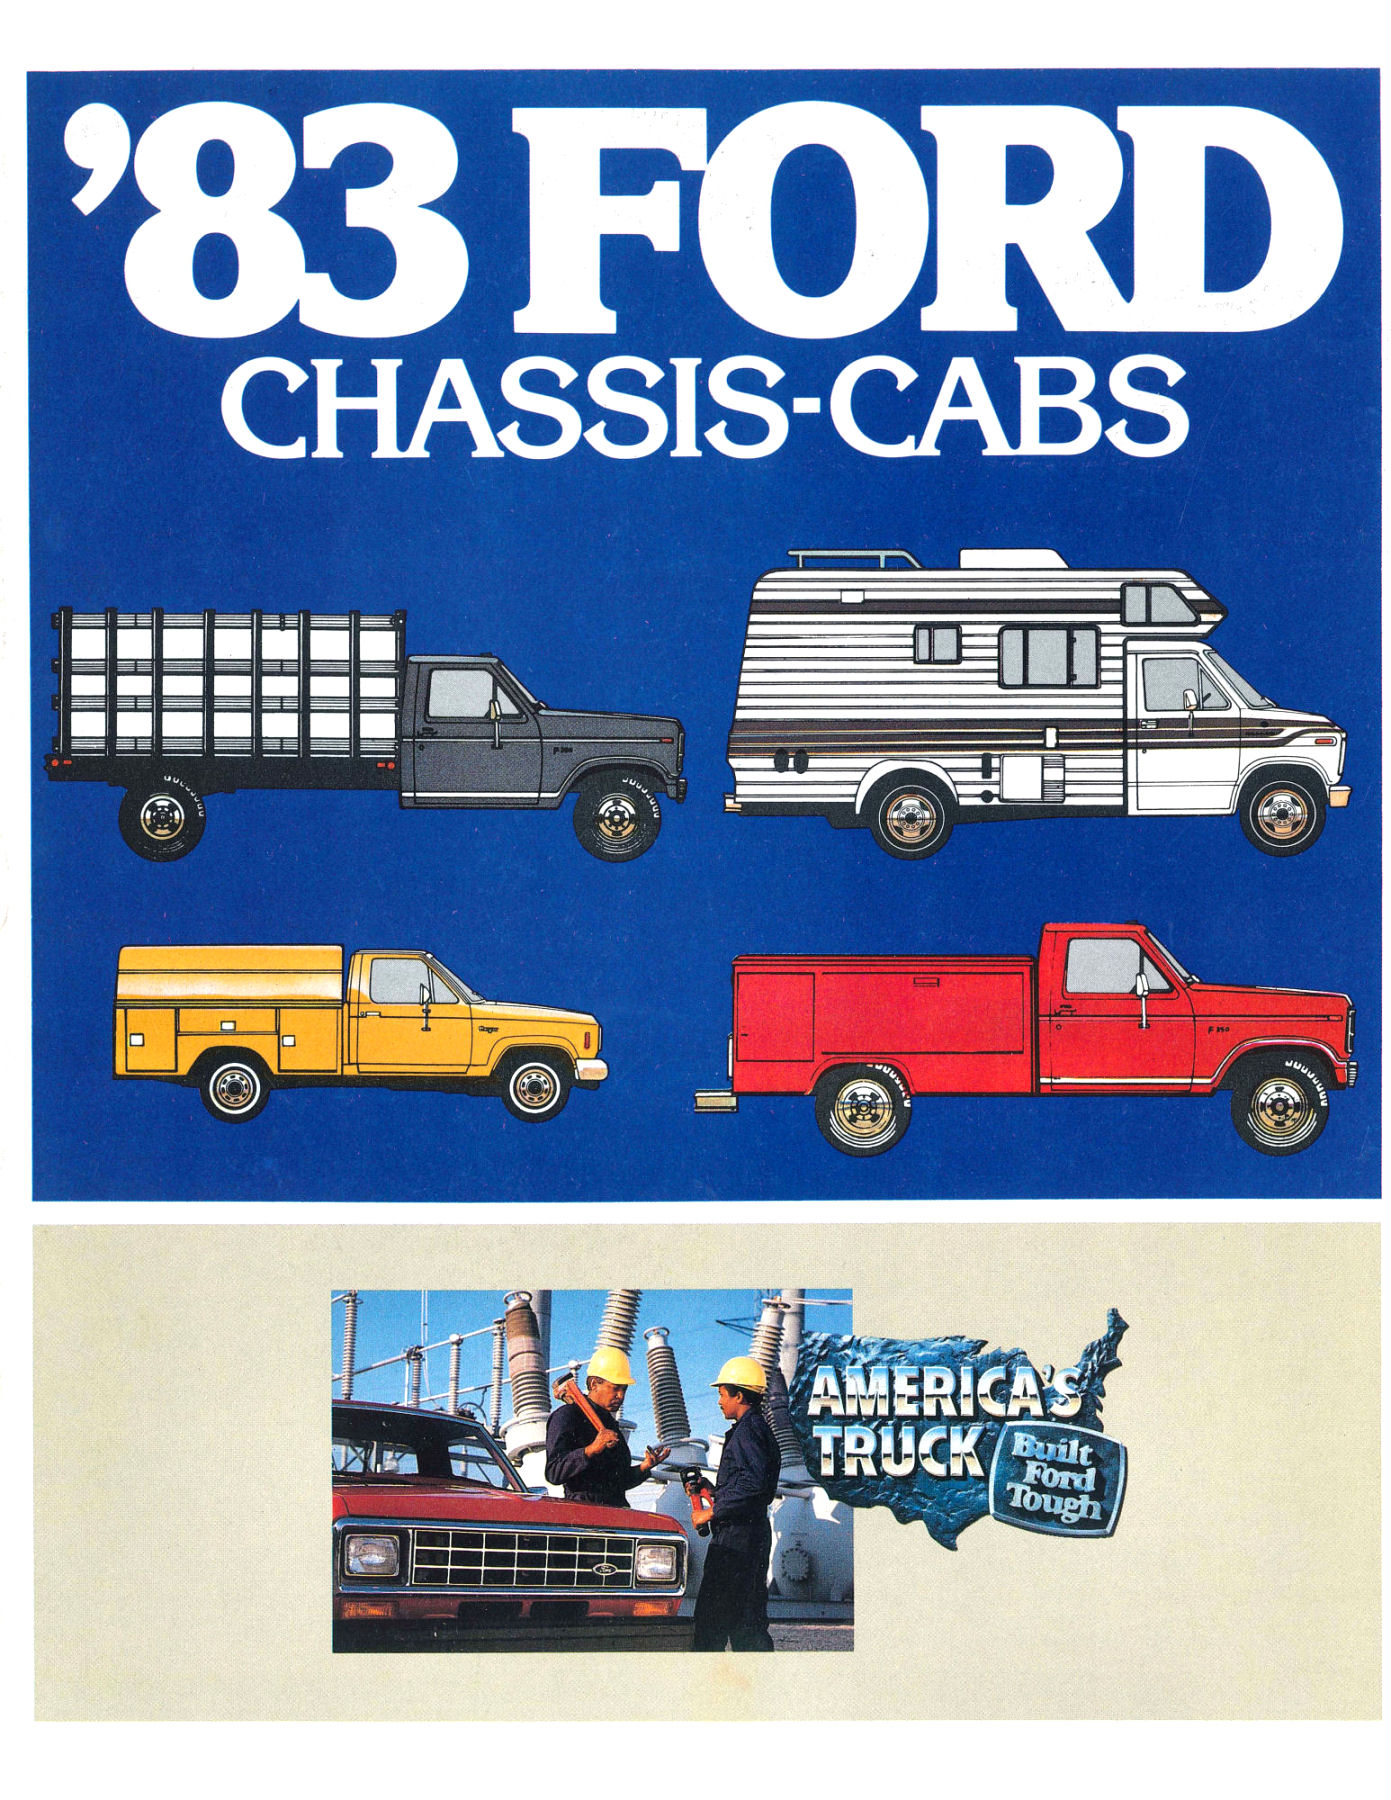 1983 Ford Chassis Cabs-01